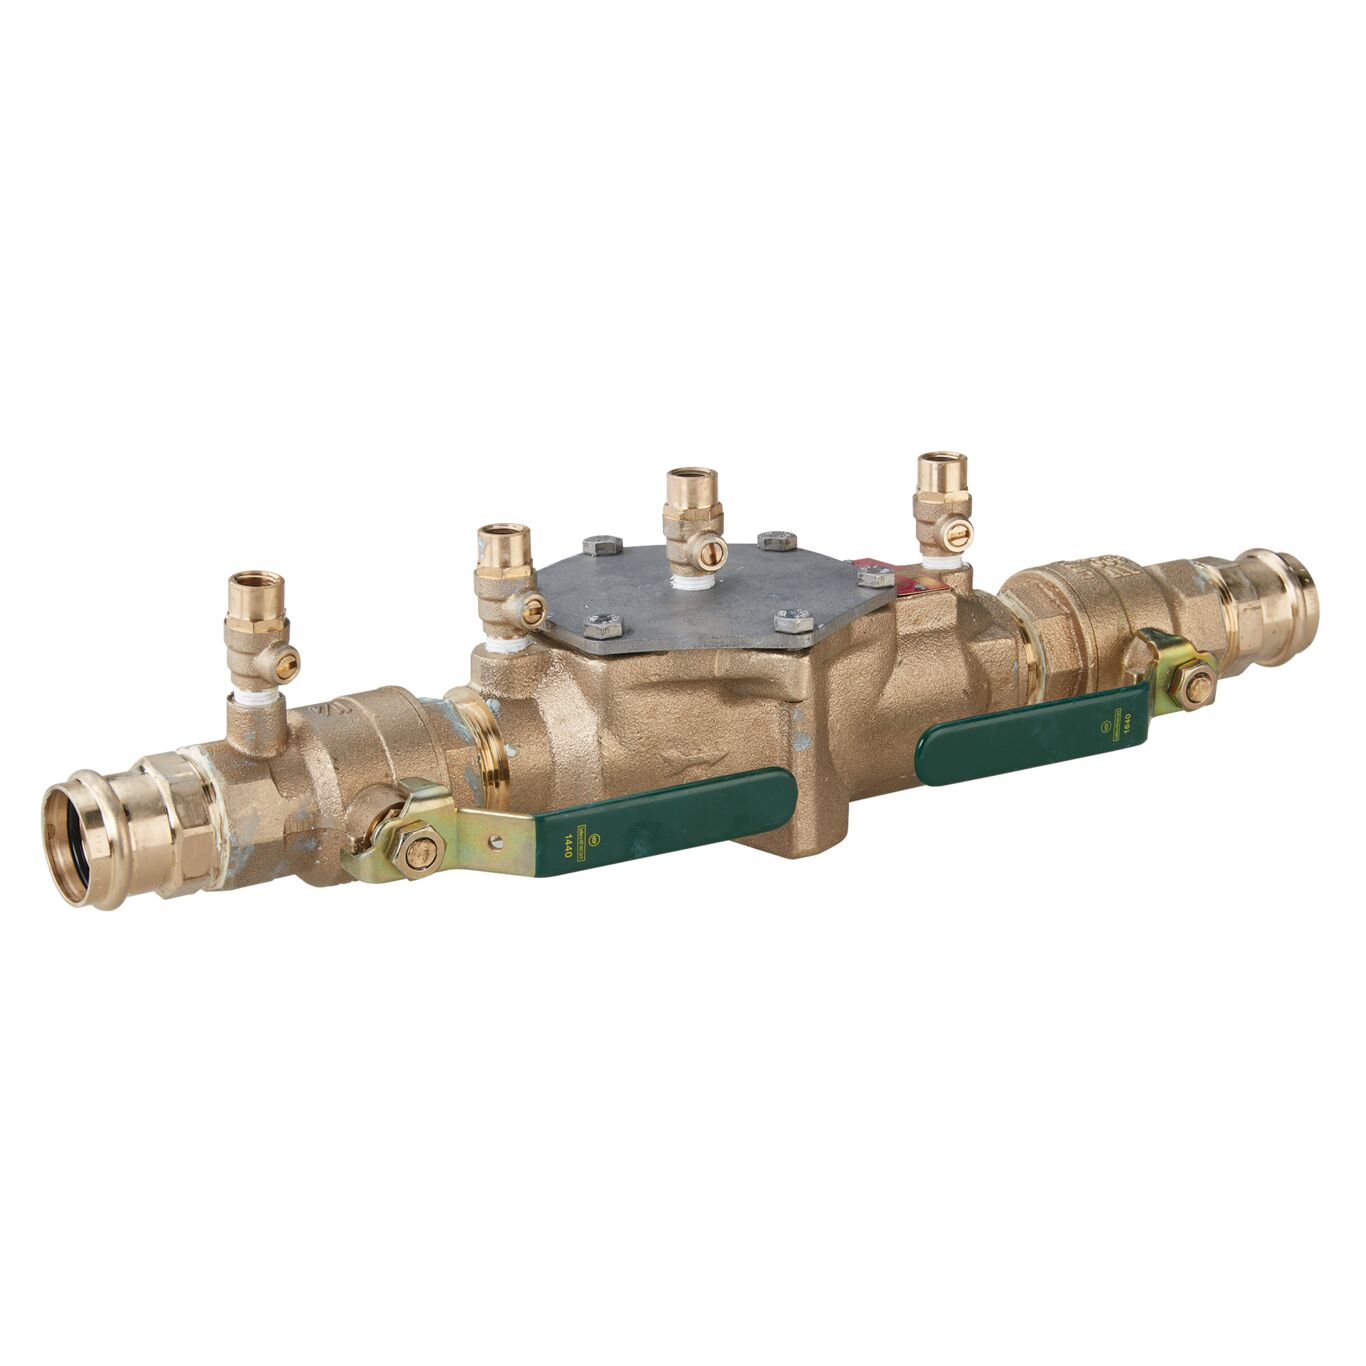 1/2 in Midline Valve 372U234 Inline Spring Loaded Check Valve Cast Brass FIP Connections Backflow Prevention Lead Free 